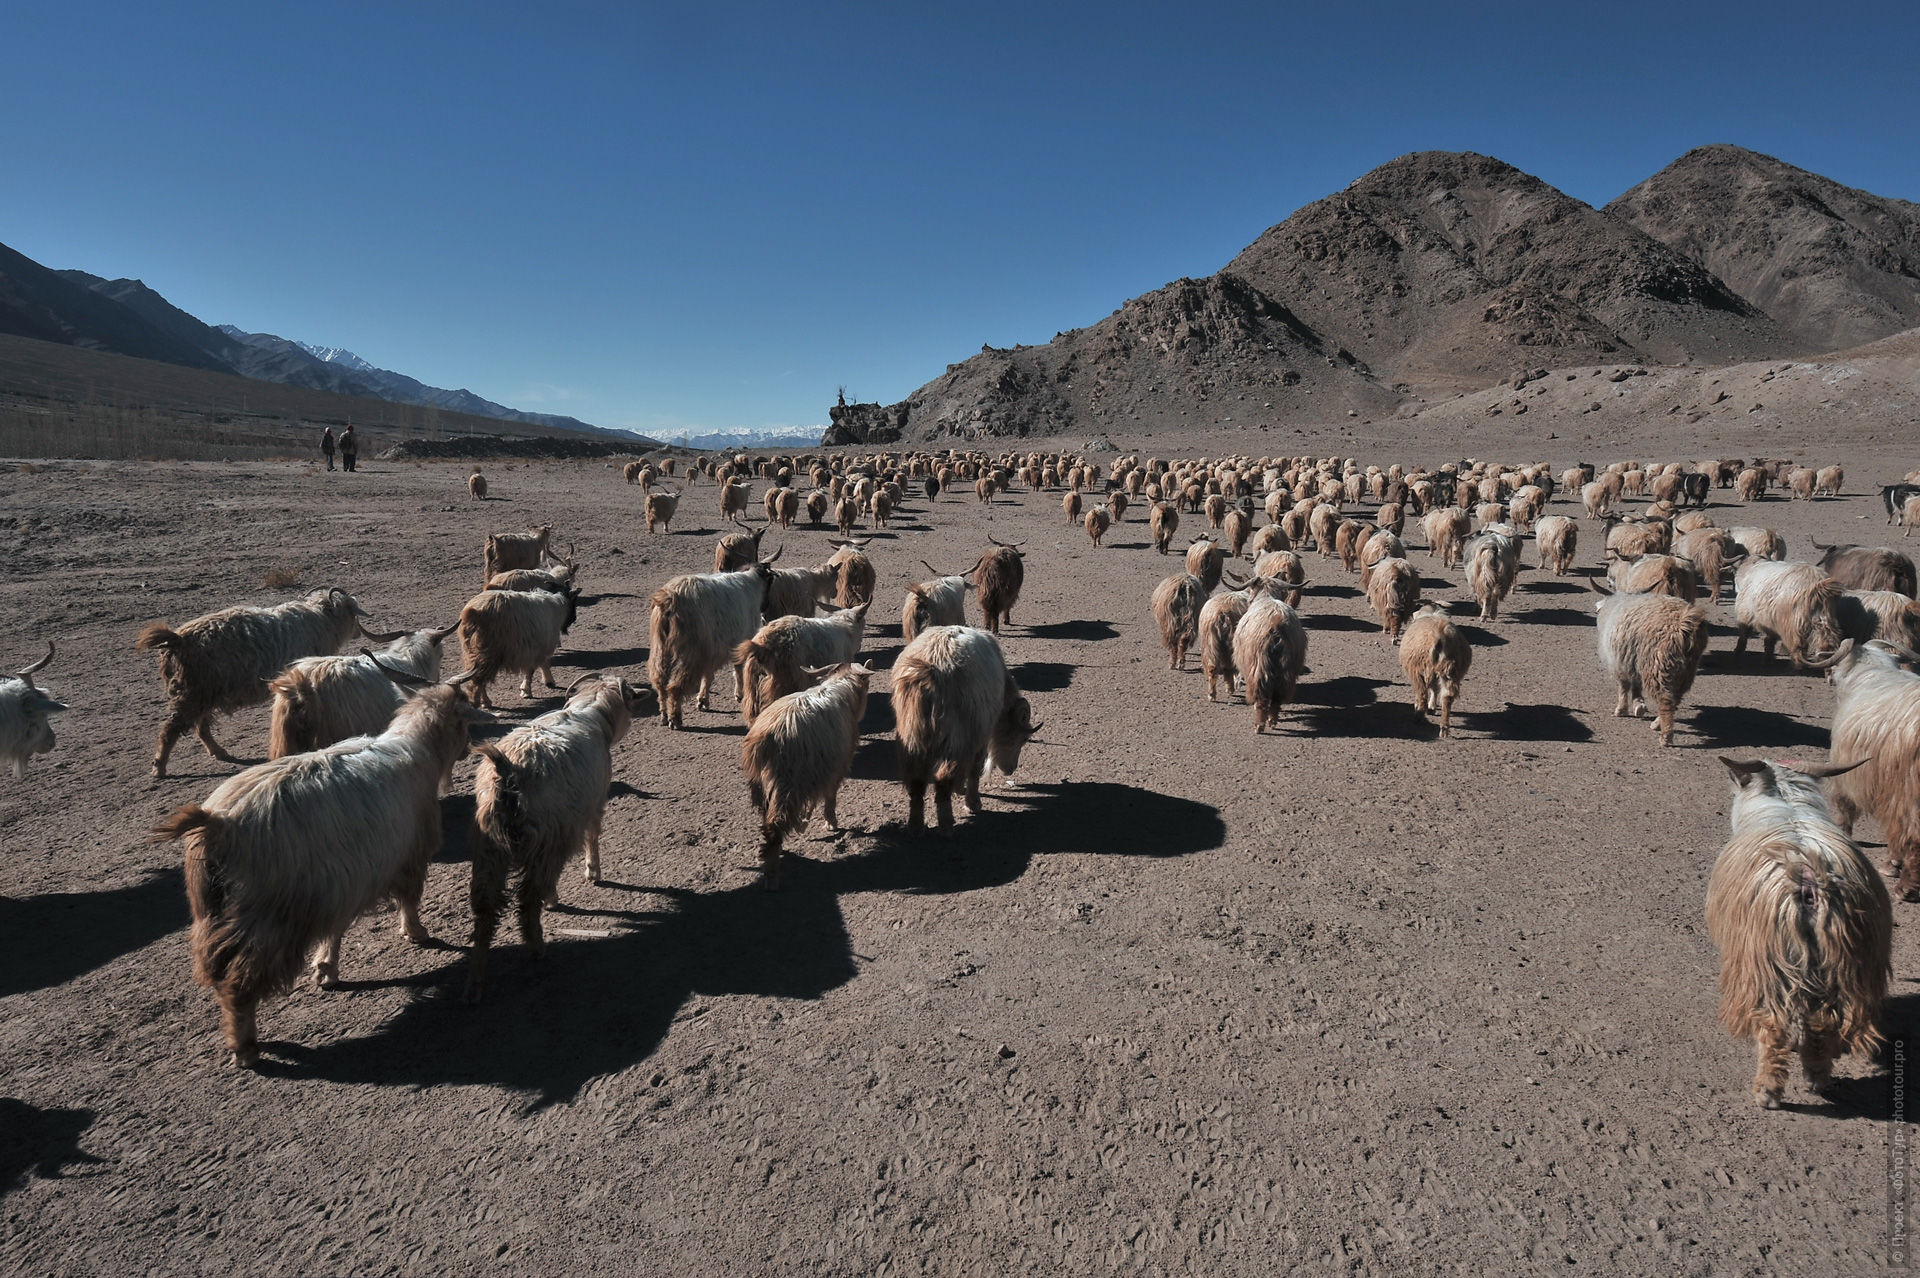 A flock of sheep in the floodplain of the Indus River. Photo tour to Tibet for the Winter Mysteries in Ladakh, Stok and Matho monasteries, 01.03. - 03/10/2020